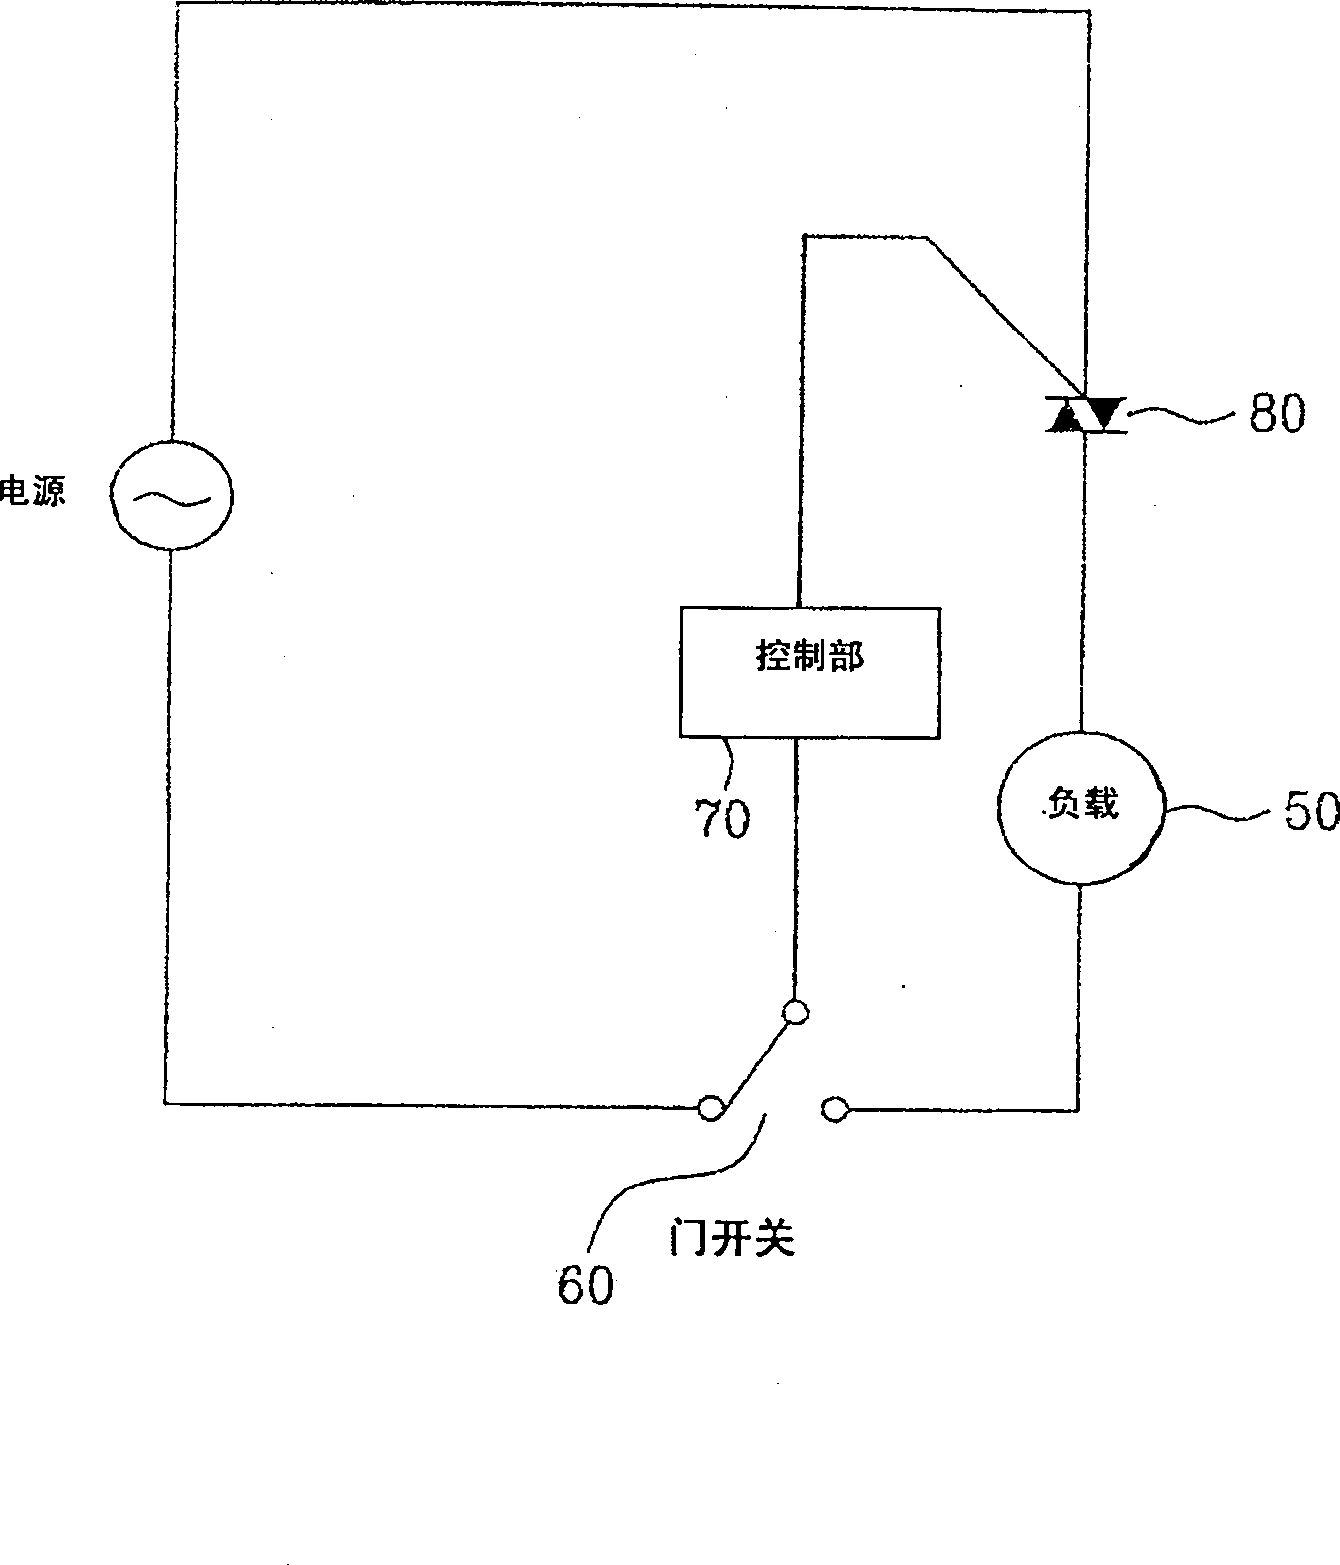 Door controlling circuit and method for dish washer